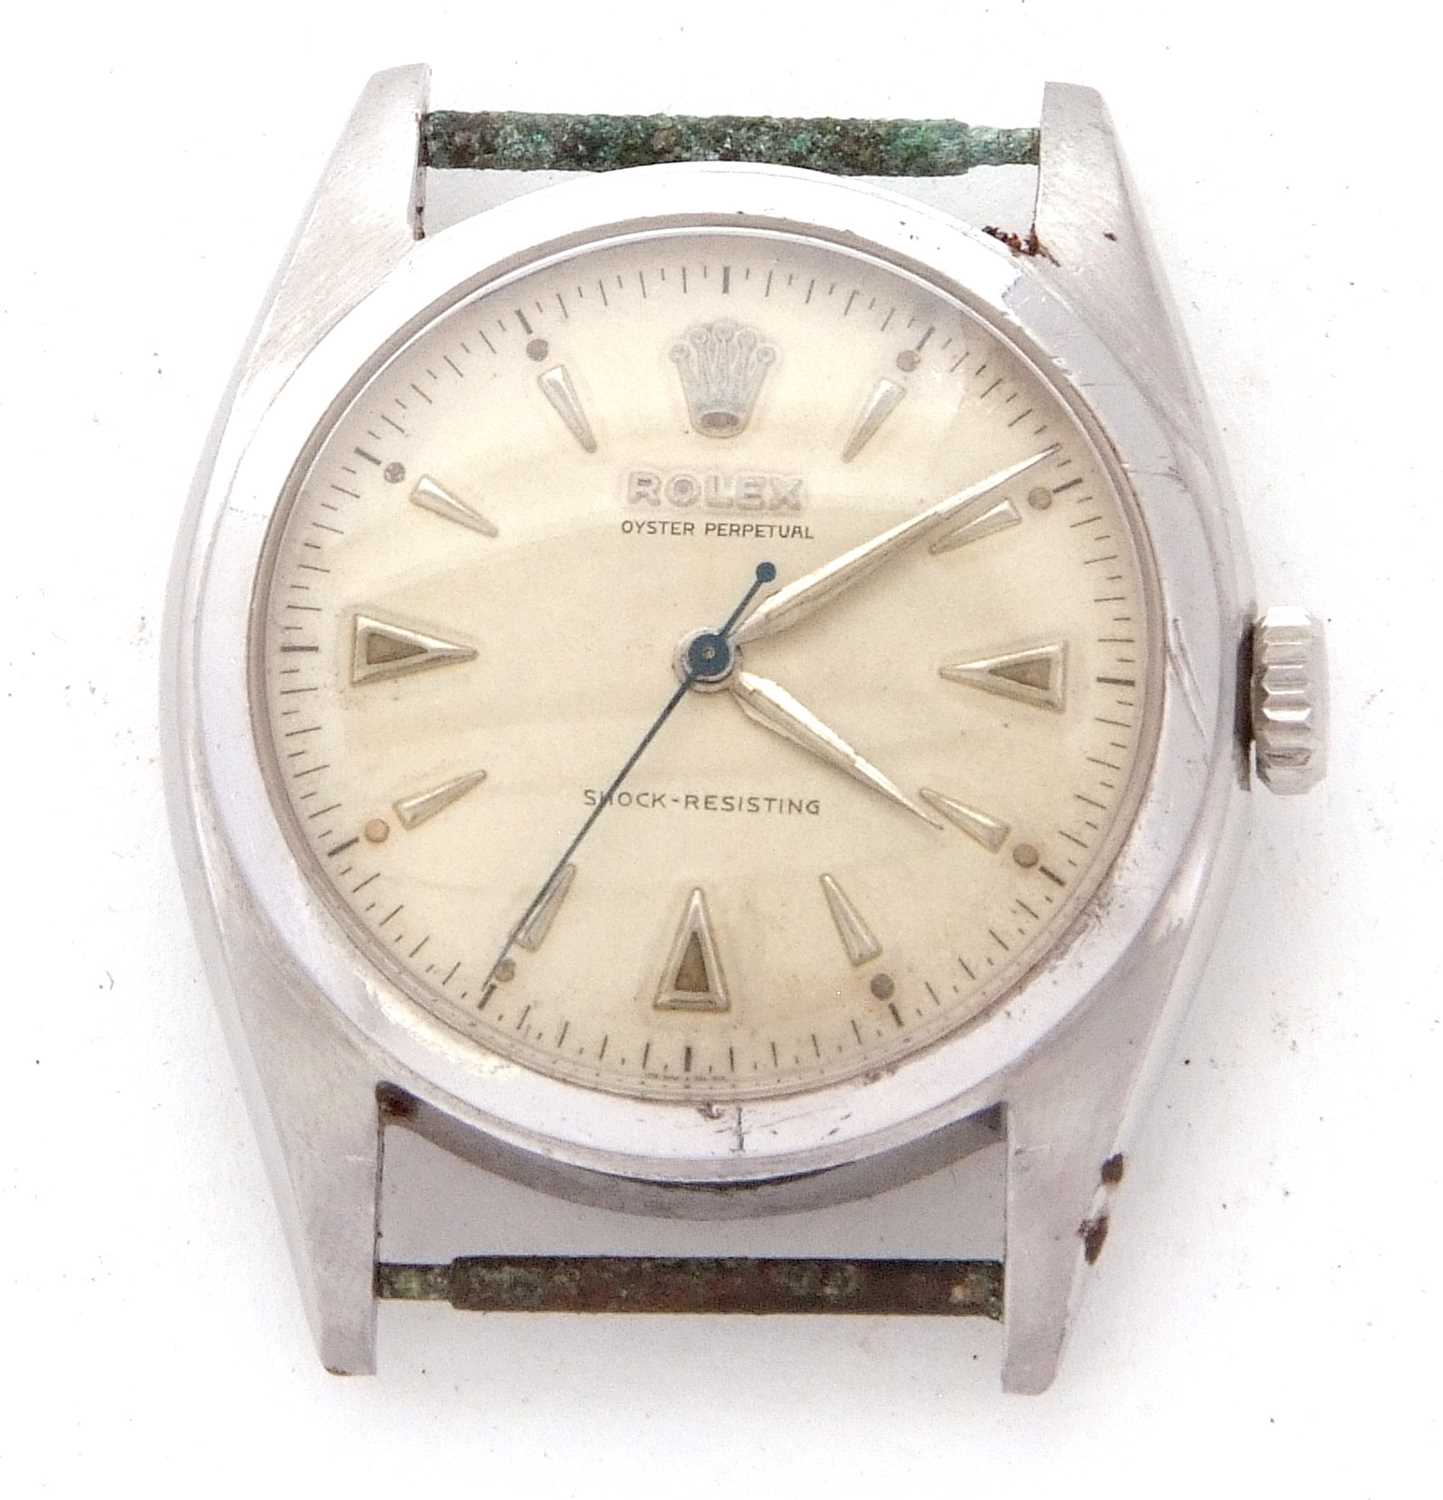 A Rolex 6098 Oyster Perpetual wristwatch, the watch has a manually crown wound movement and a - Image 6 of 7